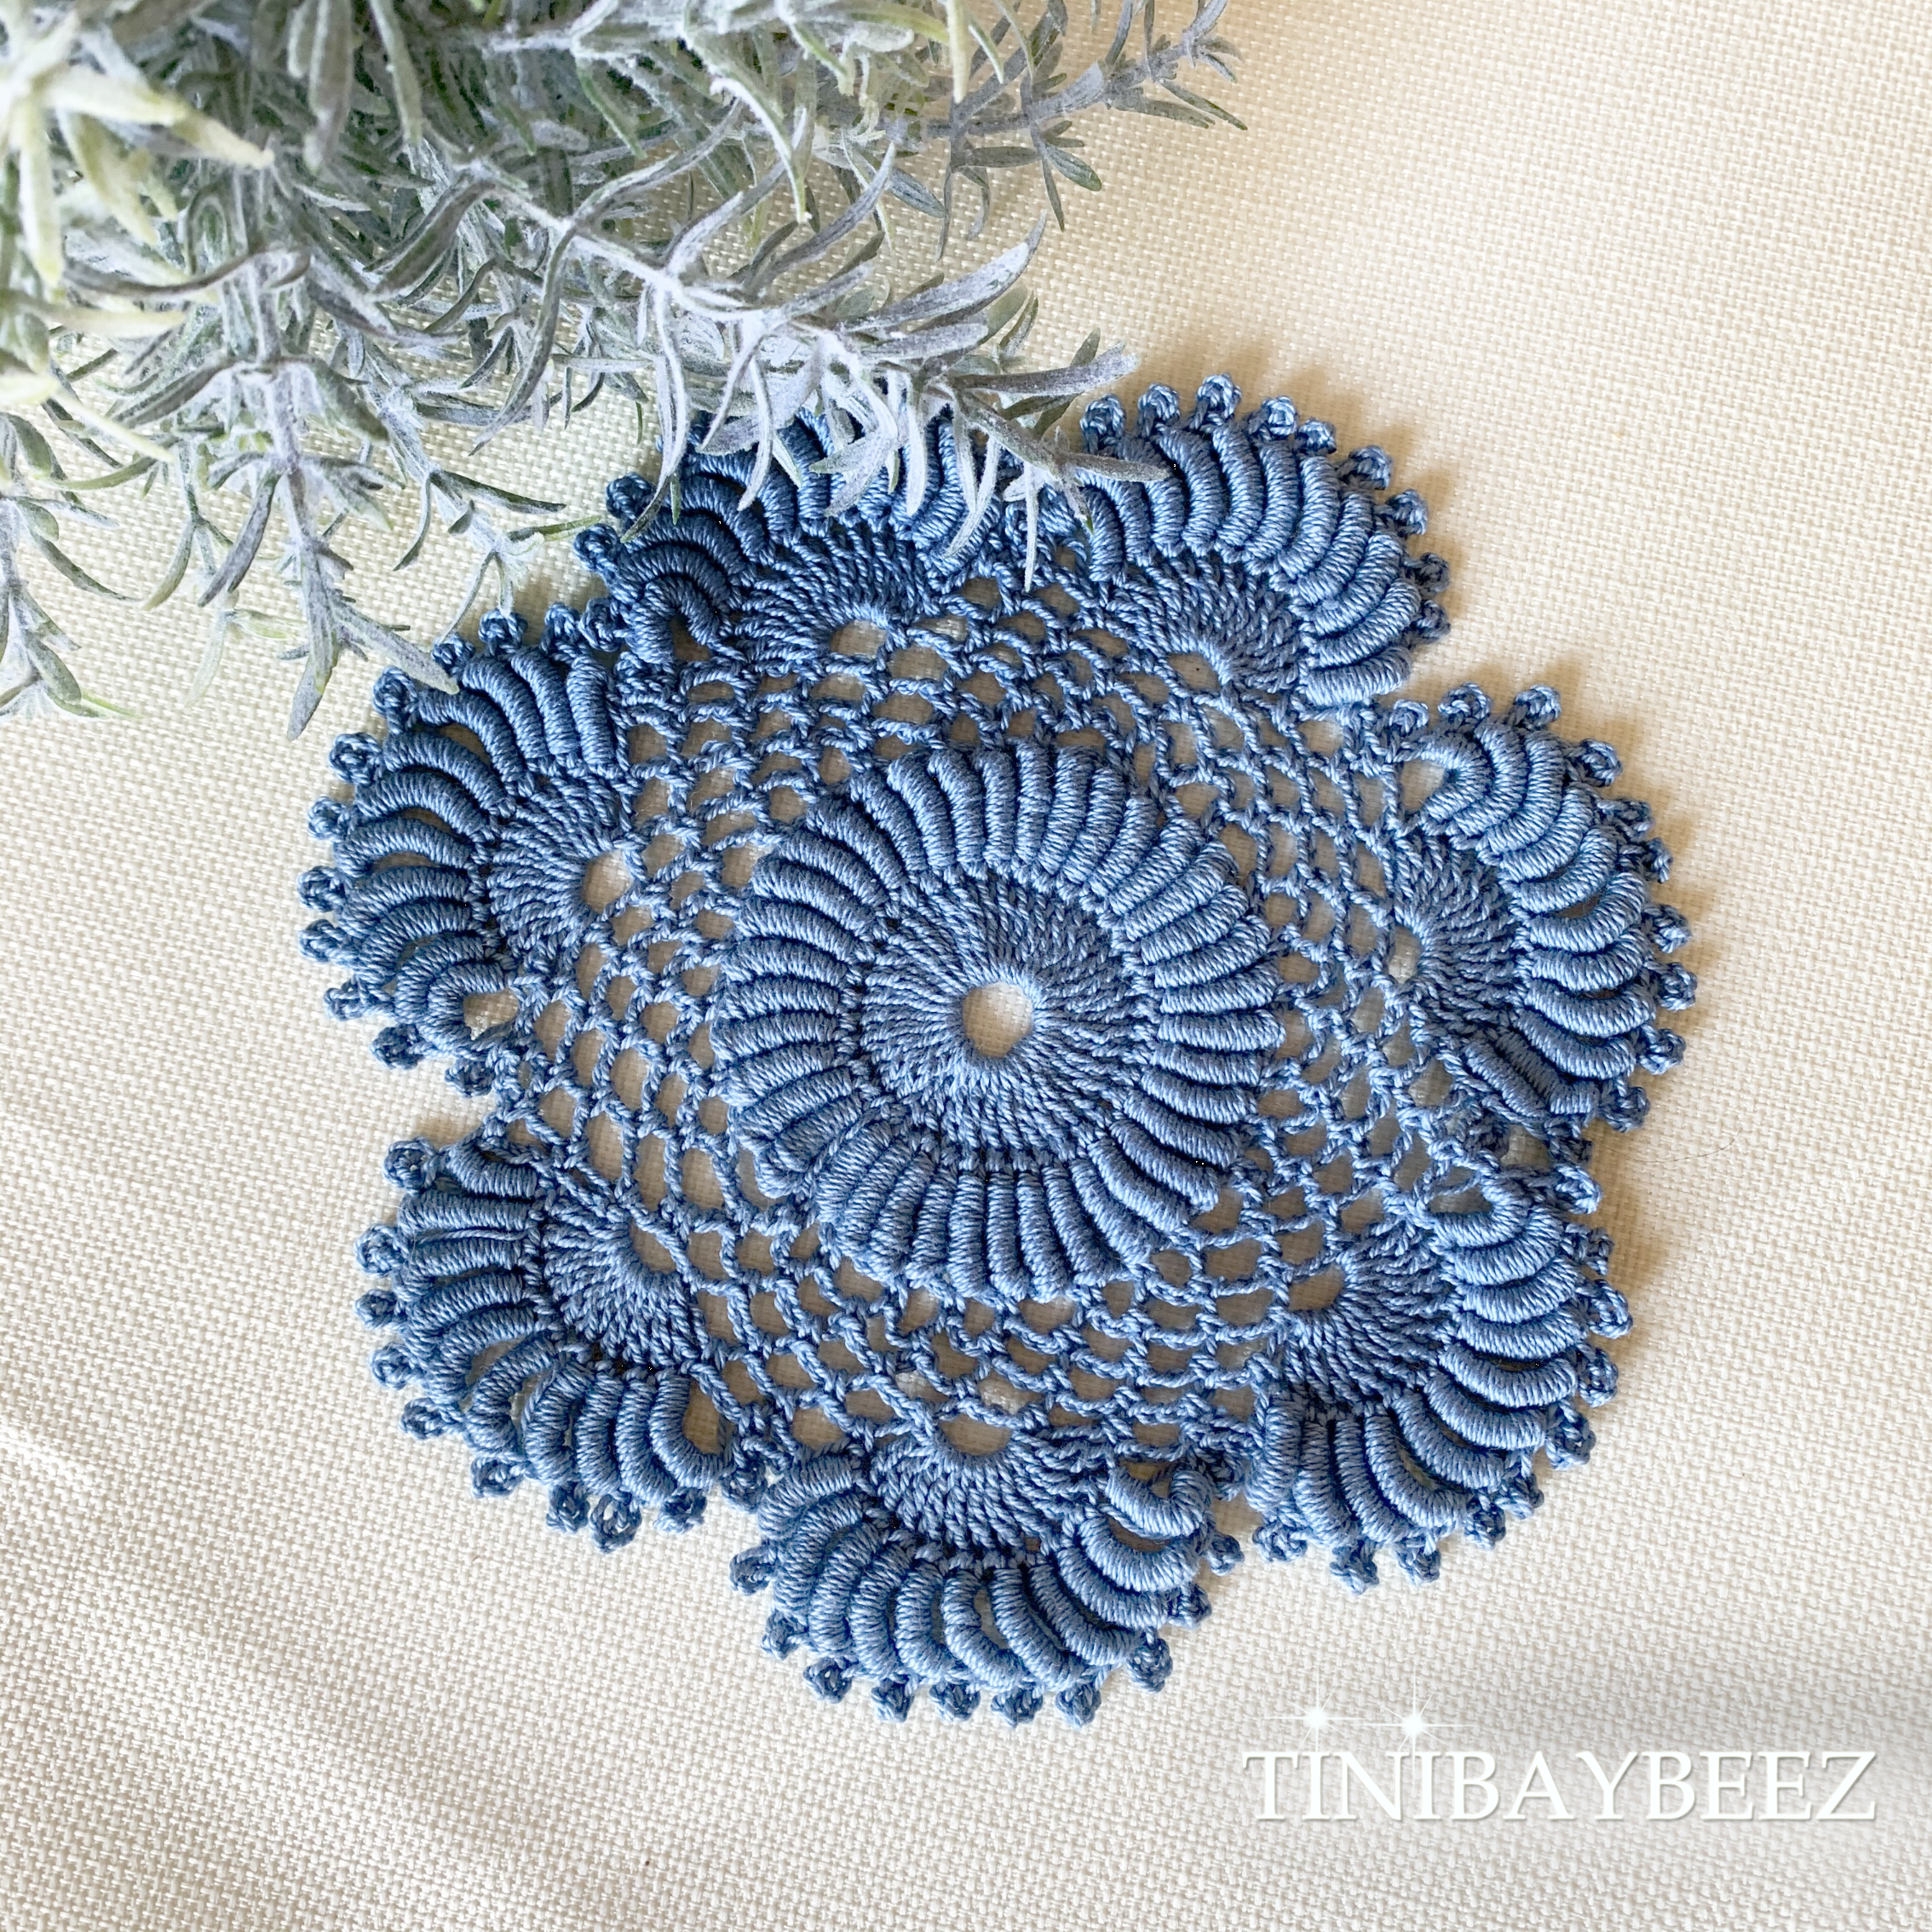 Country Blue Round Crocheted Doilies Set of 2 -6 1/2“ Dimensional Doily-Set of 2 Round Doilies in a variety of different colors